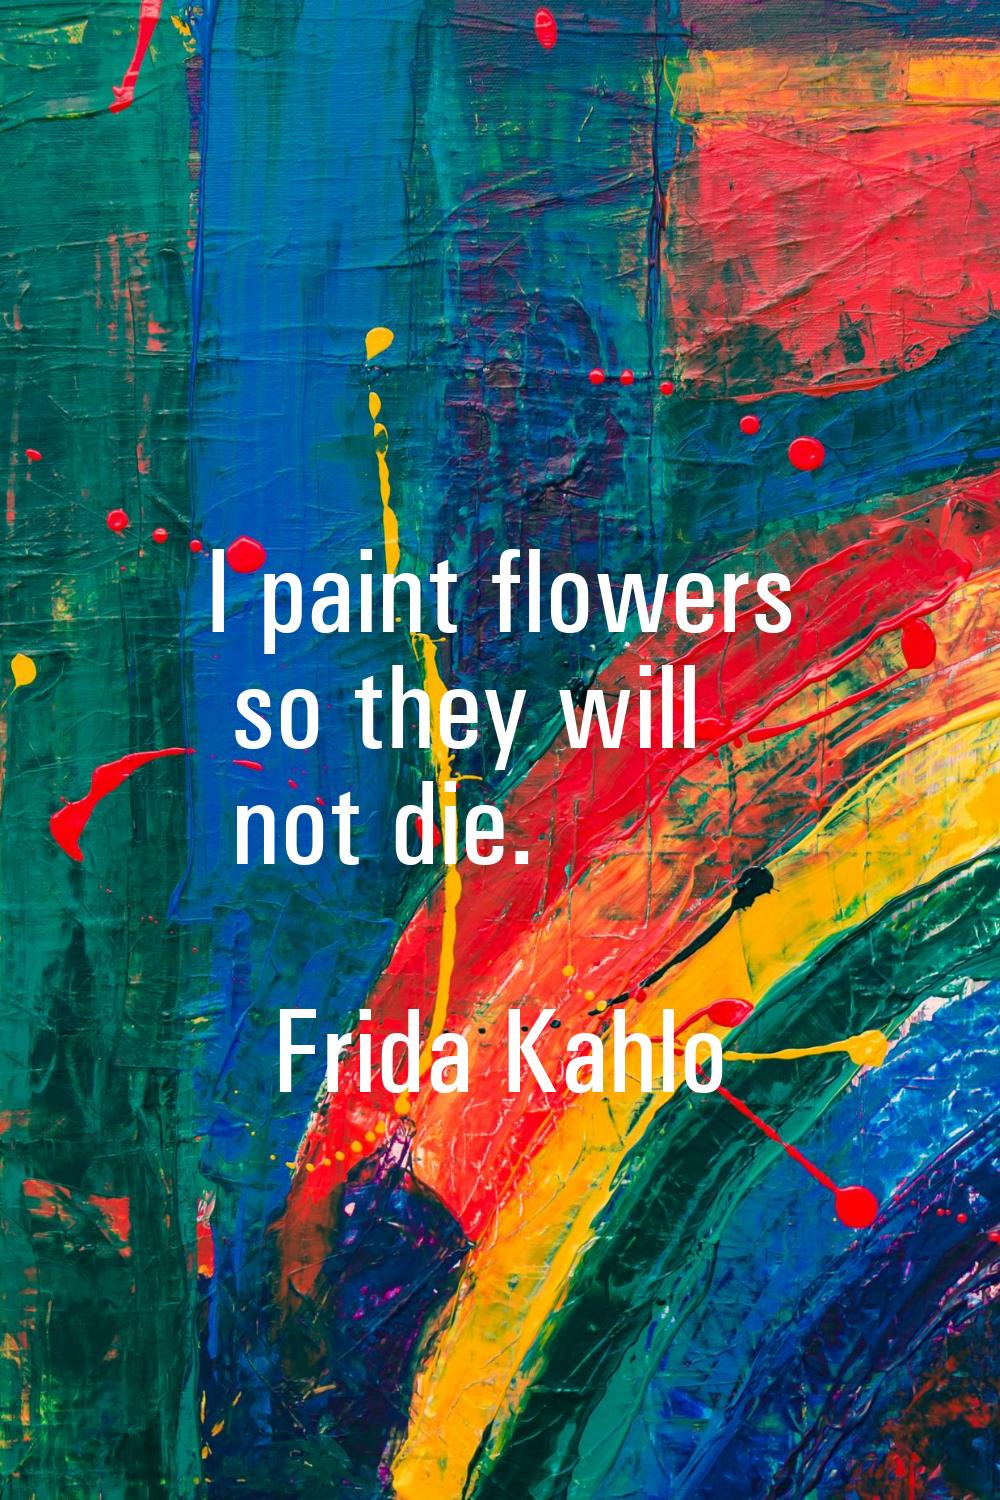 I paint flowers so they will not die.